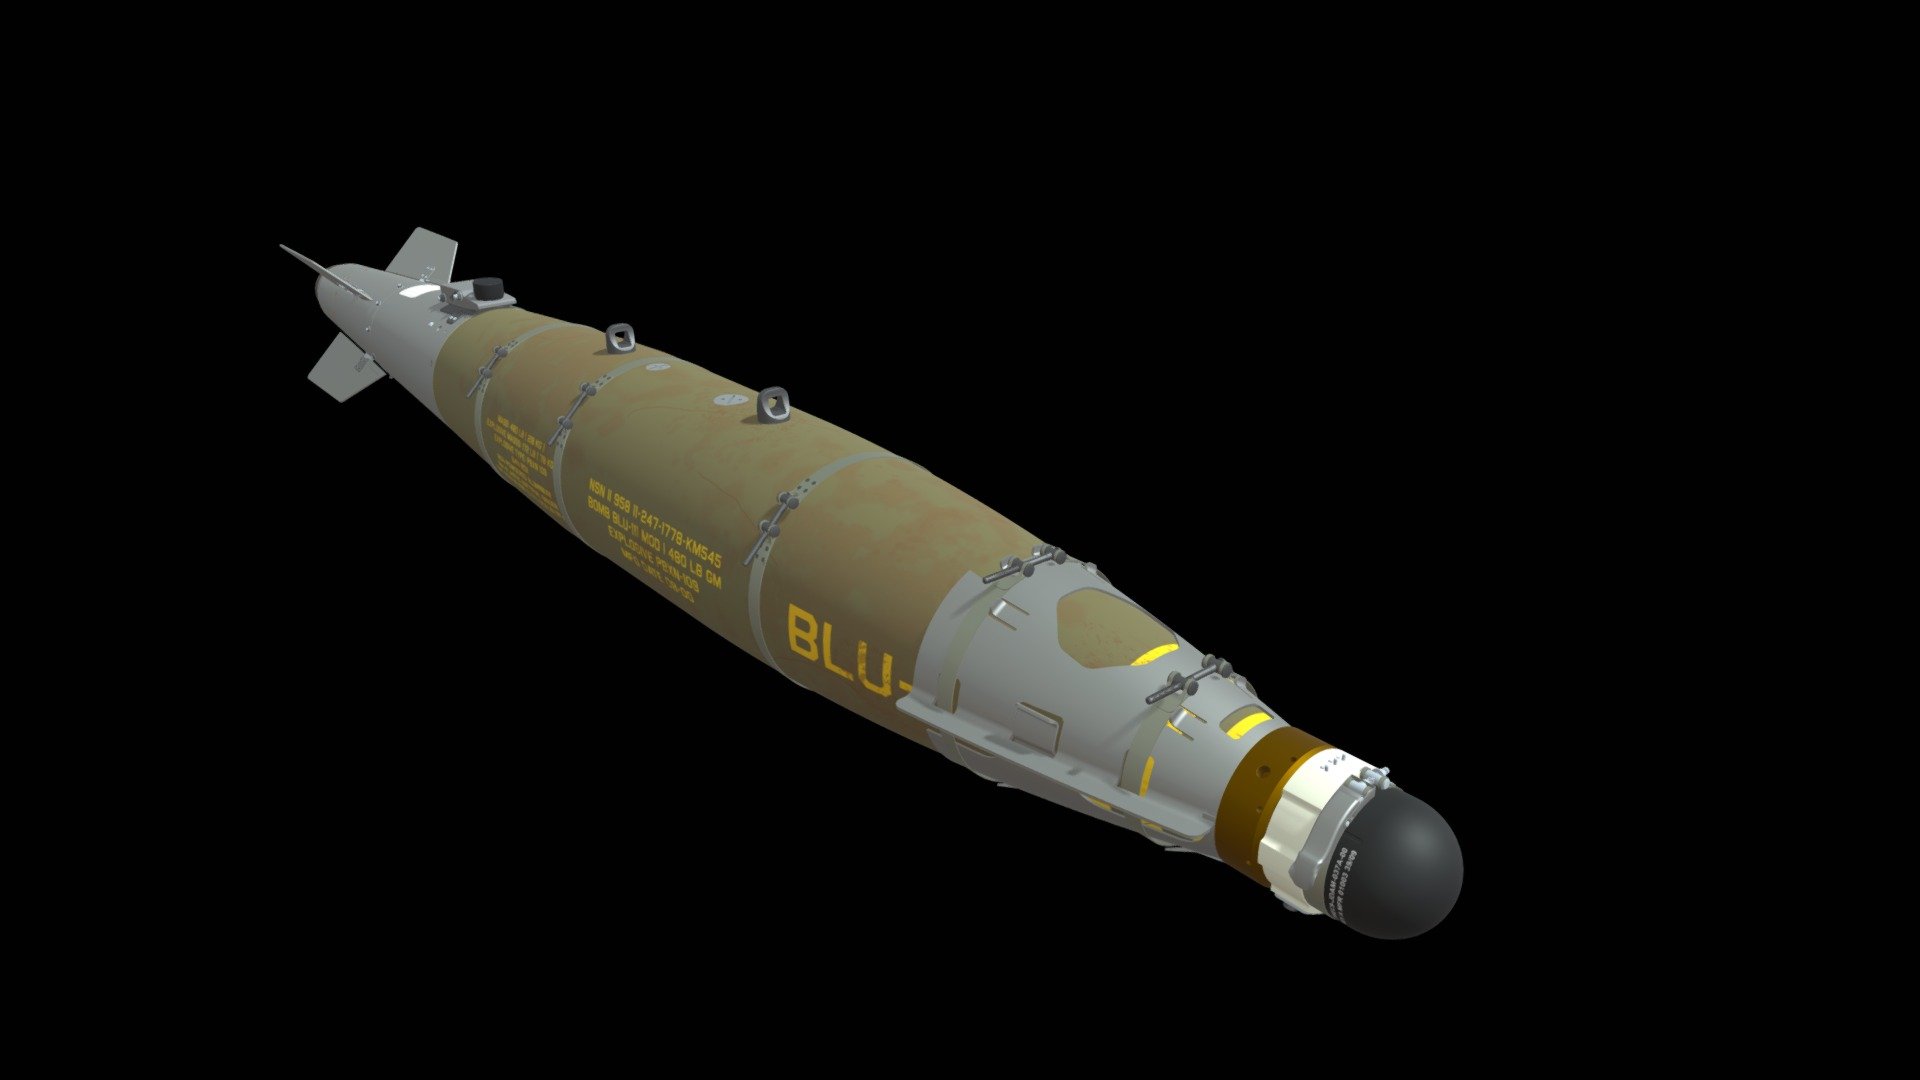 The GBU-54(V)/B by Boeing is the Laser JDAM variant of the GBU-38(V)/B 500 lb. class JDAM. It consists of a GBU-38(V)/B bomb fitted with a DSU-38/B laser homing target detection device.
That is why they look similar, one can easily distinguish one from the other, because the GBU-54 has a connector that connects the DSU-38 / B with the tail assembly.Instead of the MK 82, the BLU-111/B warhead can also be used in the GBU-38/B series JDAMs. The BLU-111/B is externally identical to the MK 82, but uses the PBXN-109 thermally insensitive explosive
This model was built by interpreting photographs and images available on the internet and therefore its dimensions and details are not exact.
I make these models as a hobby 3d model